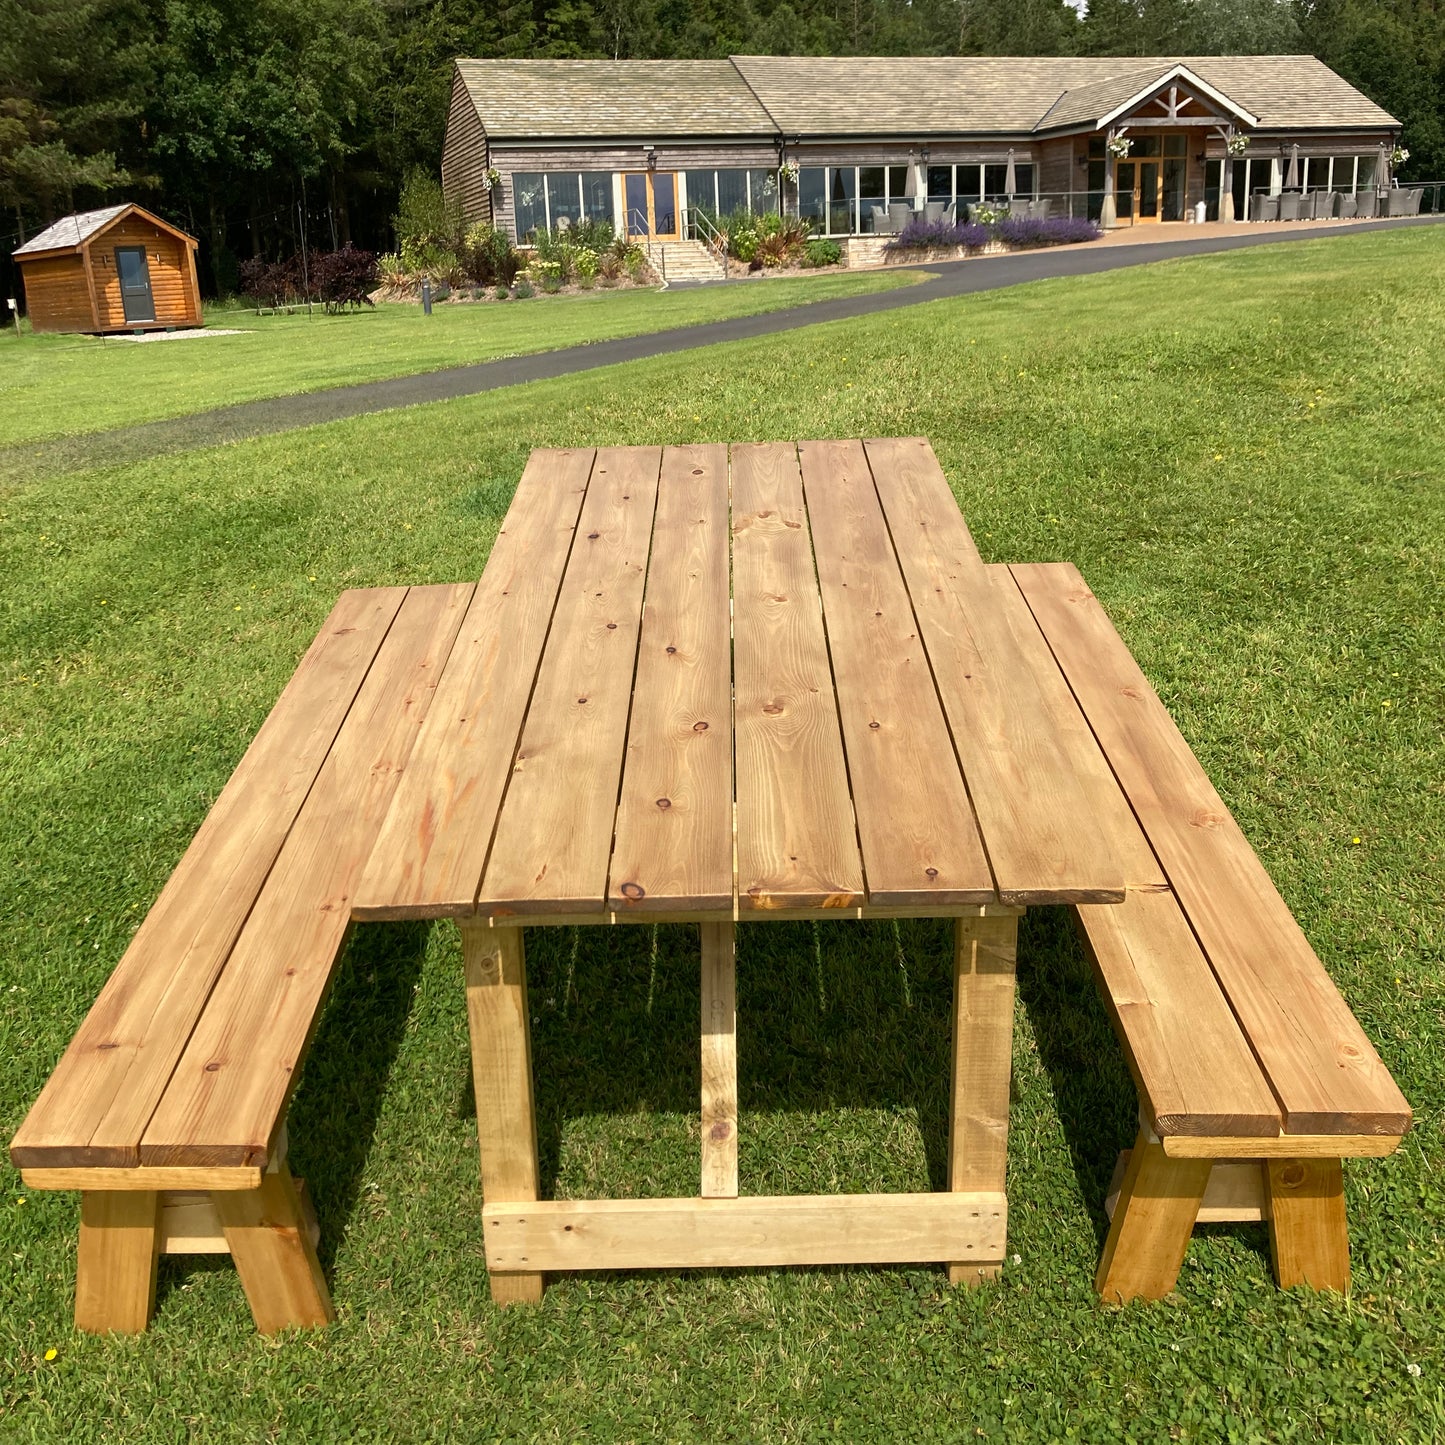 3. Outdoor Folding Rustic-style Bench